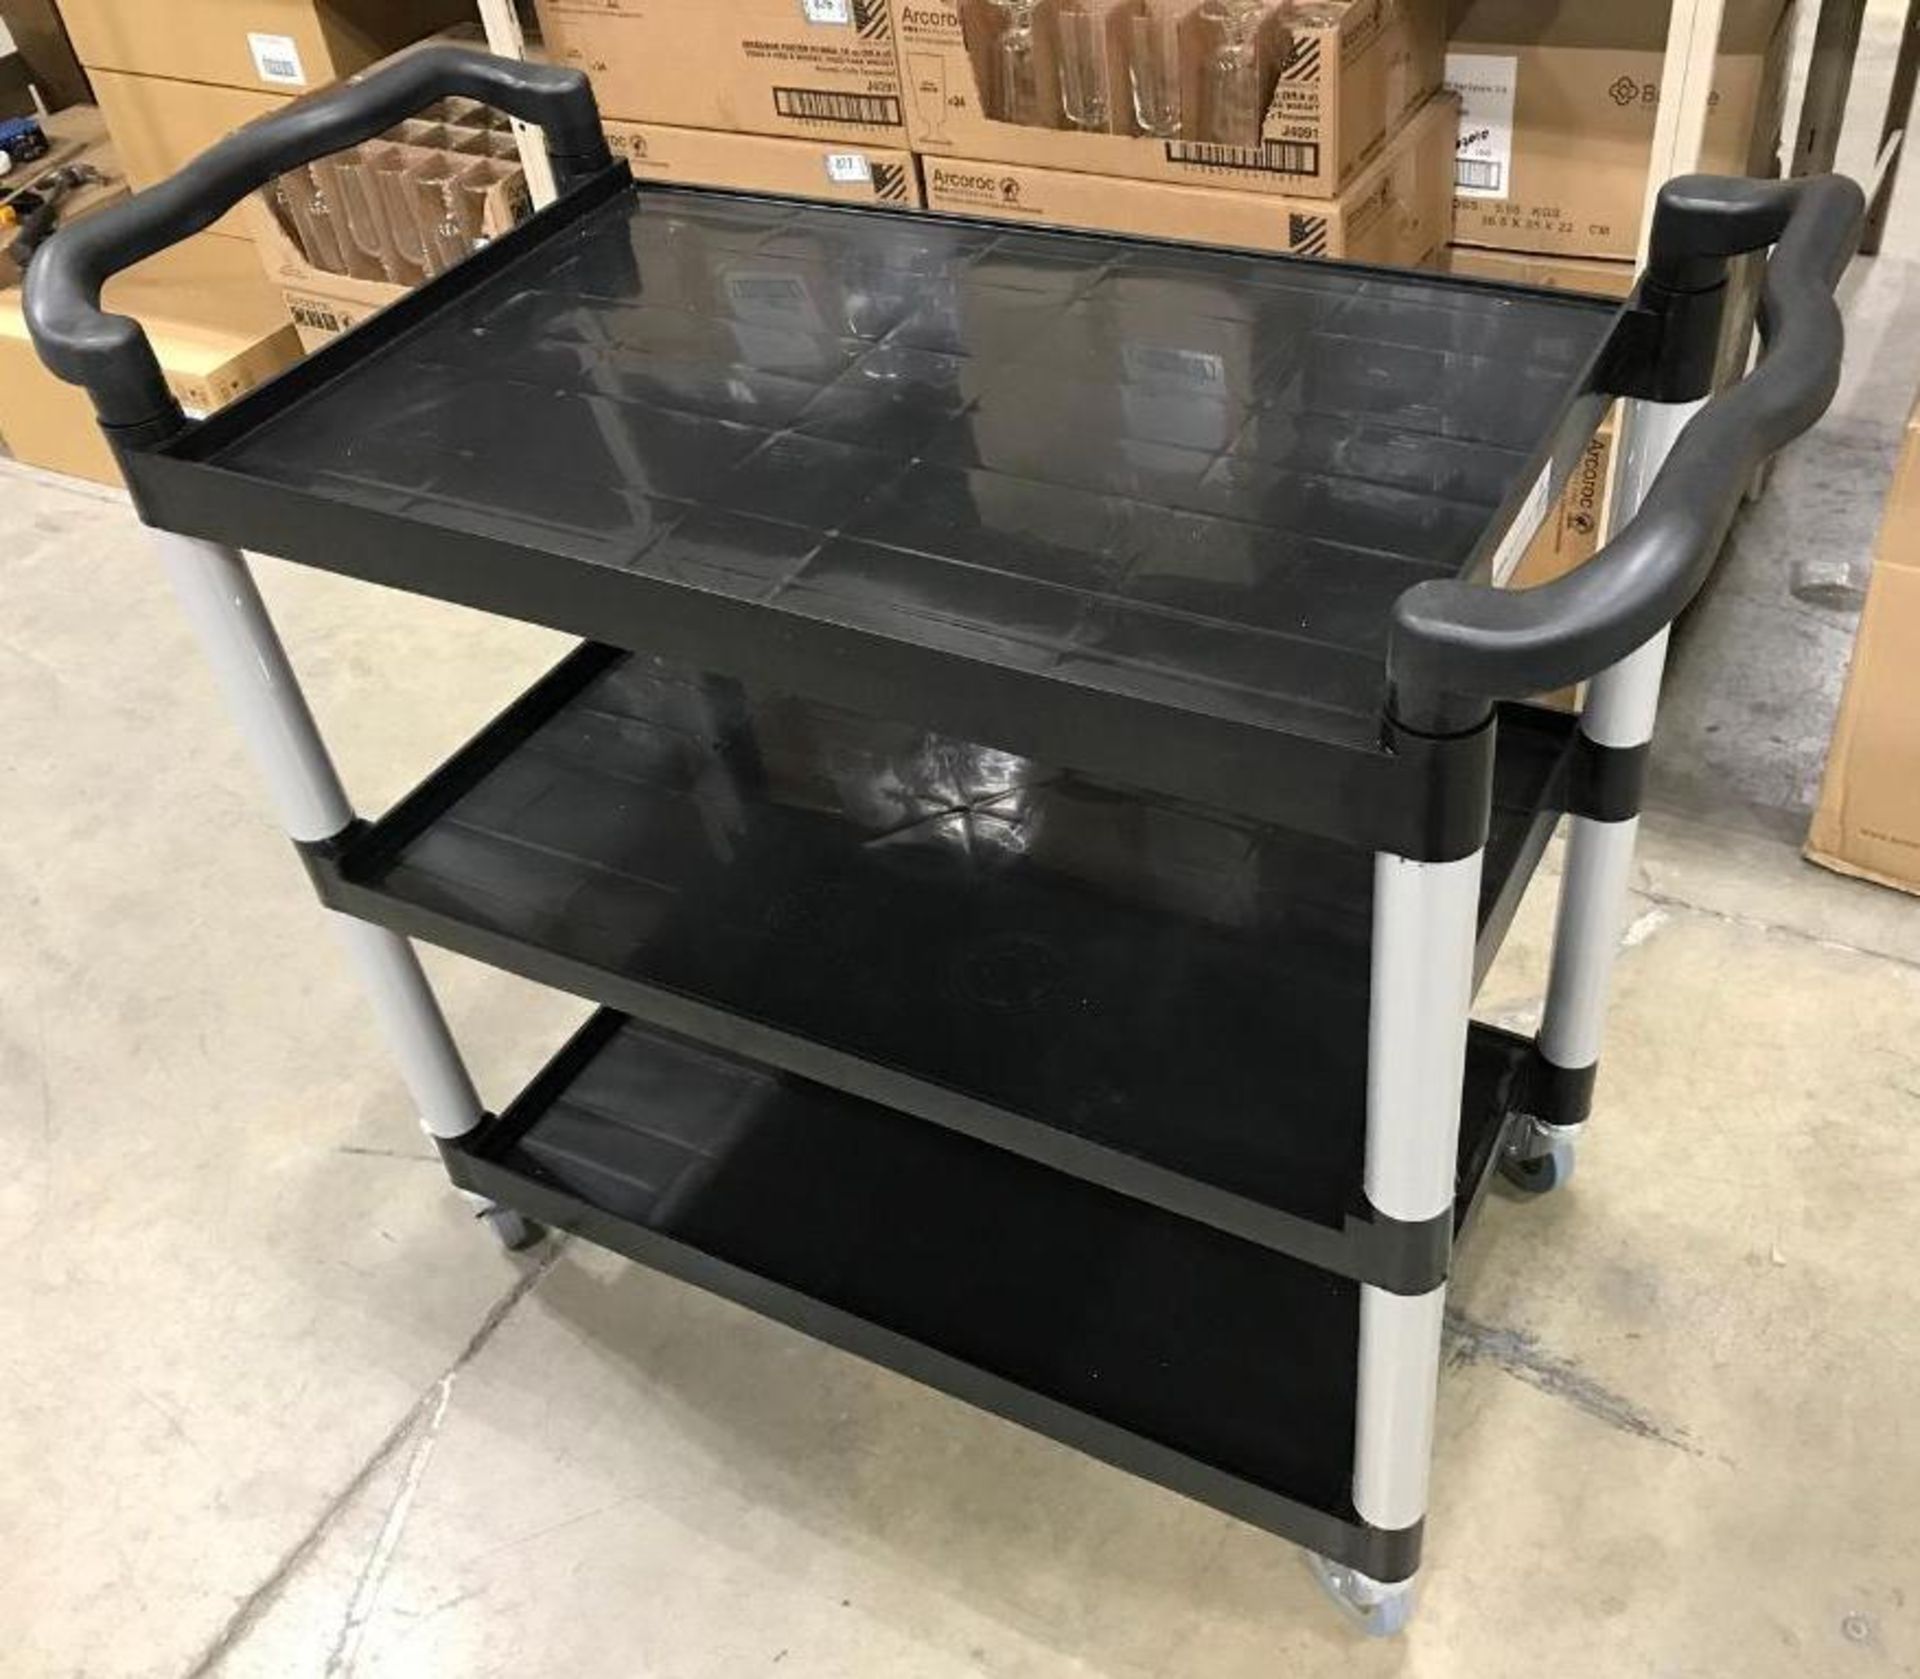 3-TIER TROLLEY CART, BLACK, 19-3/4"X42-1/2"X37-7/8"H, 120-T2042 - NEW - Image 2 of 4